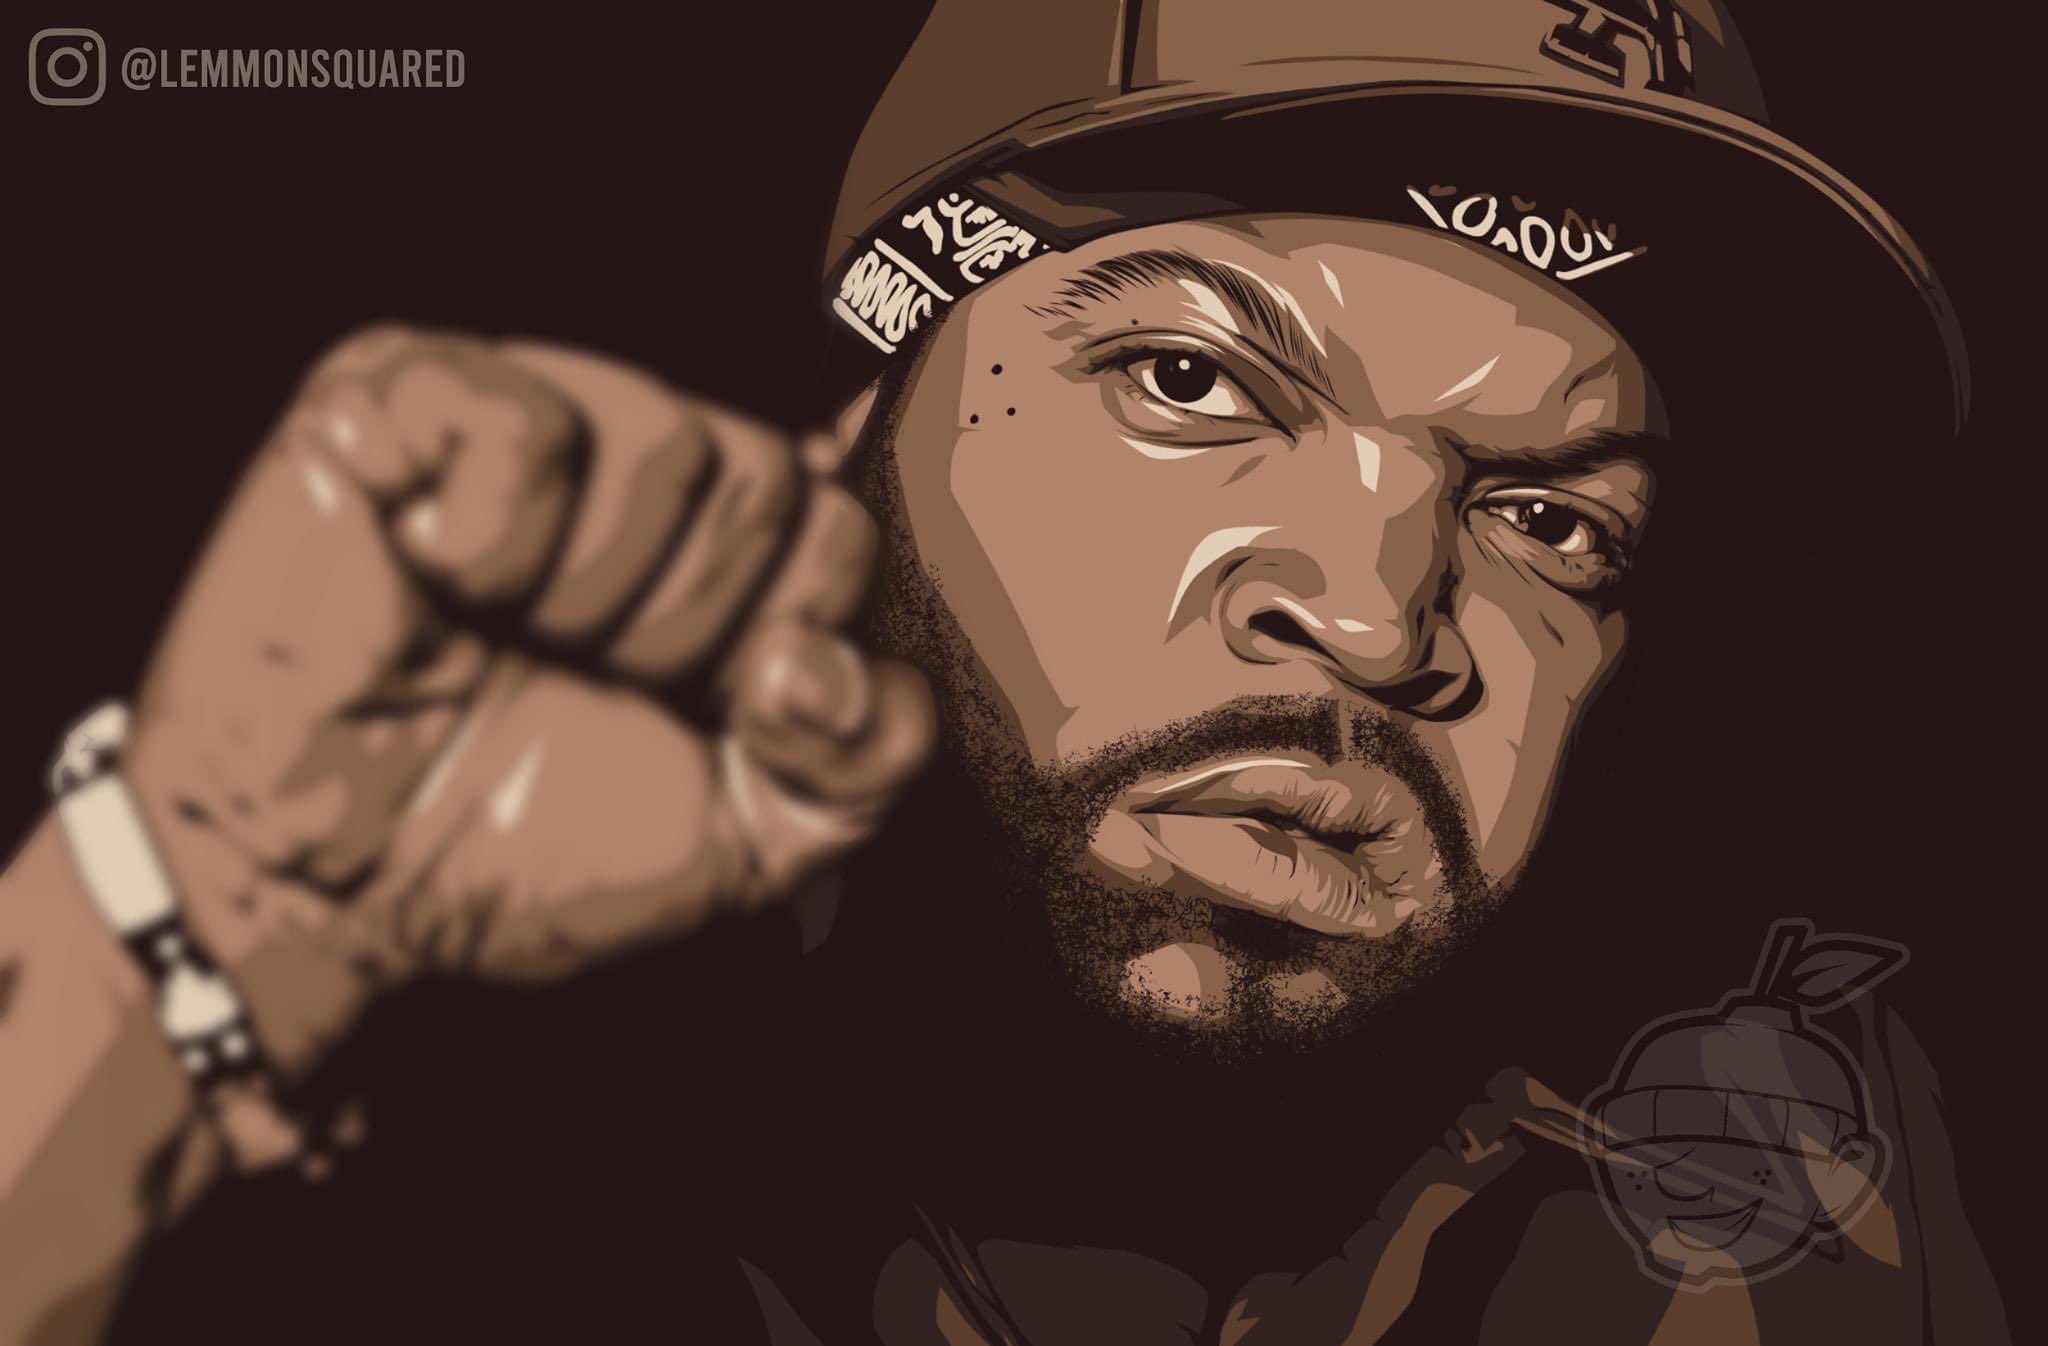 Ice Cube Wallpaper 71 pictures